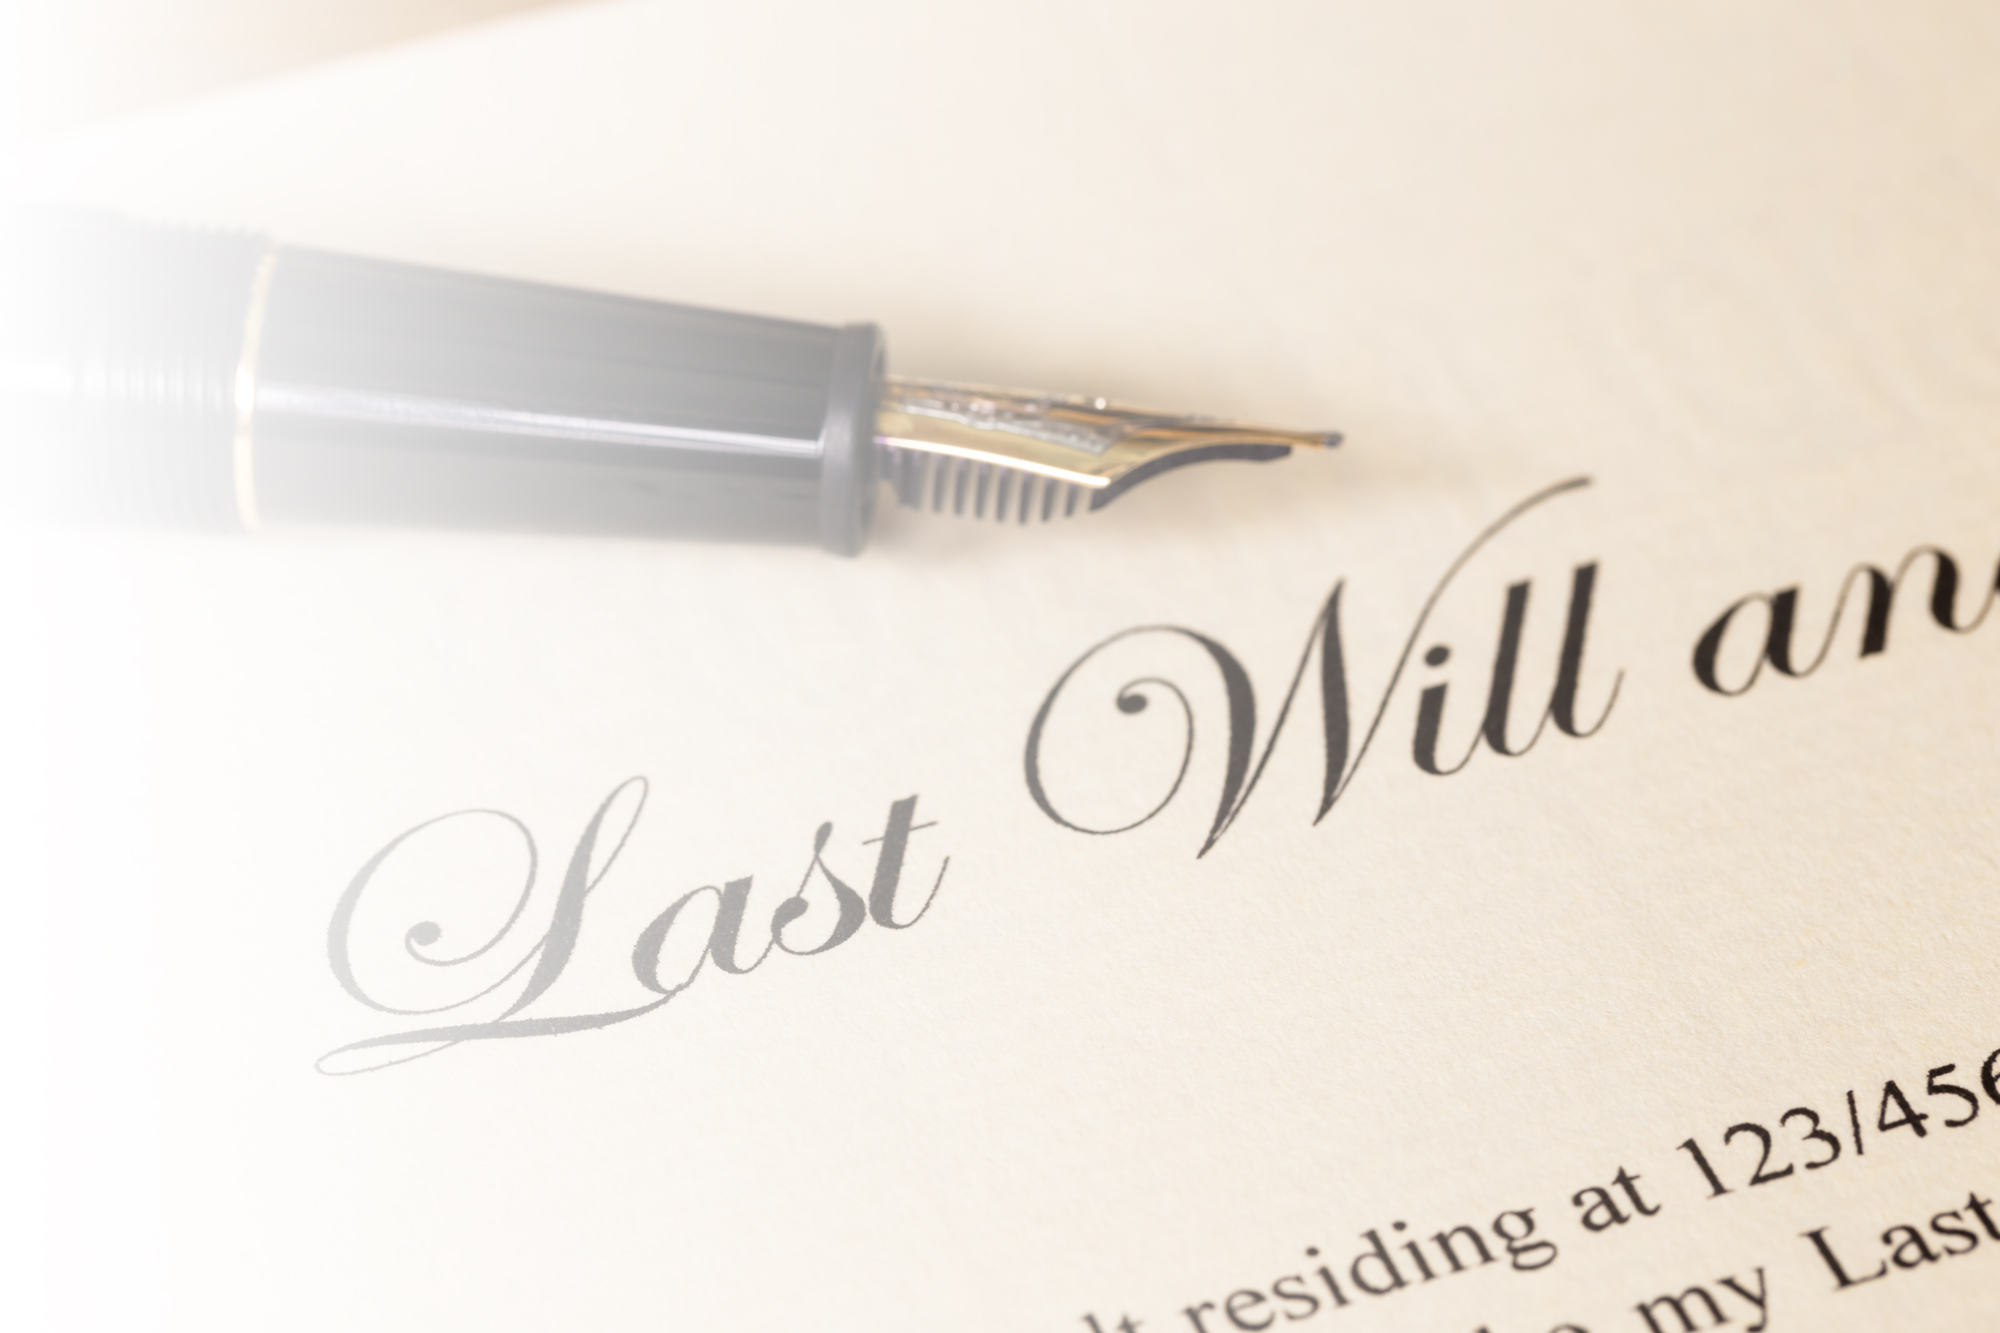 How to make a will